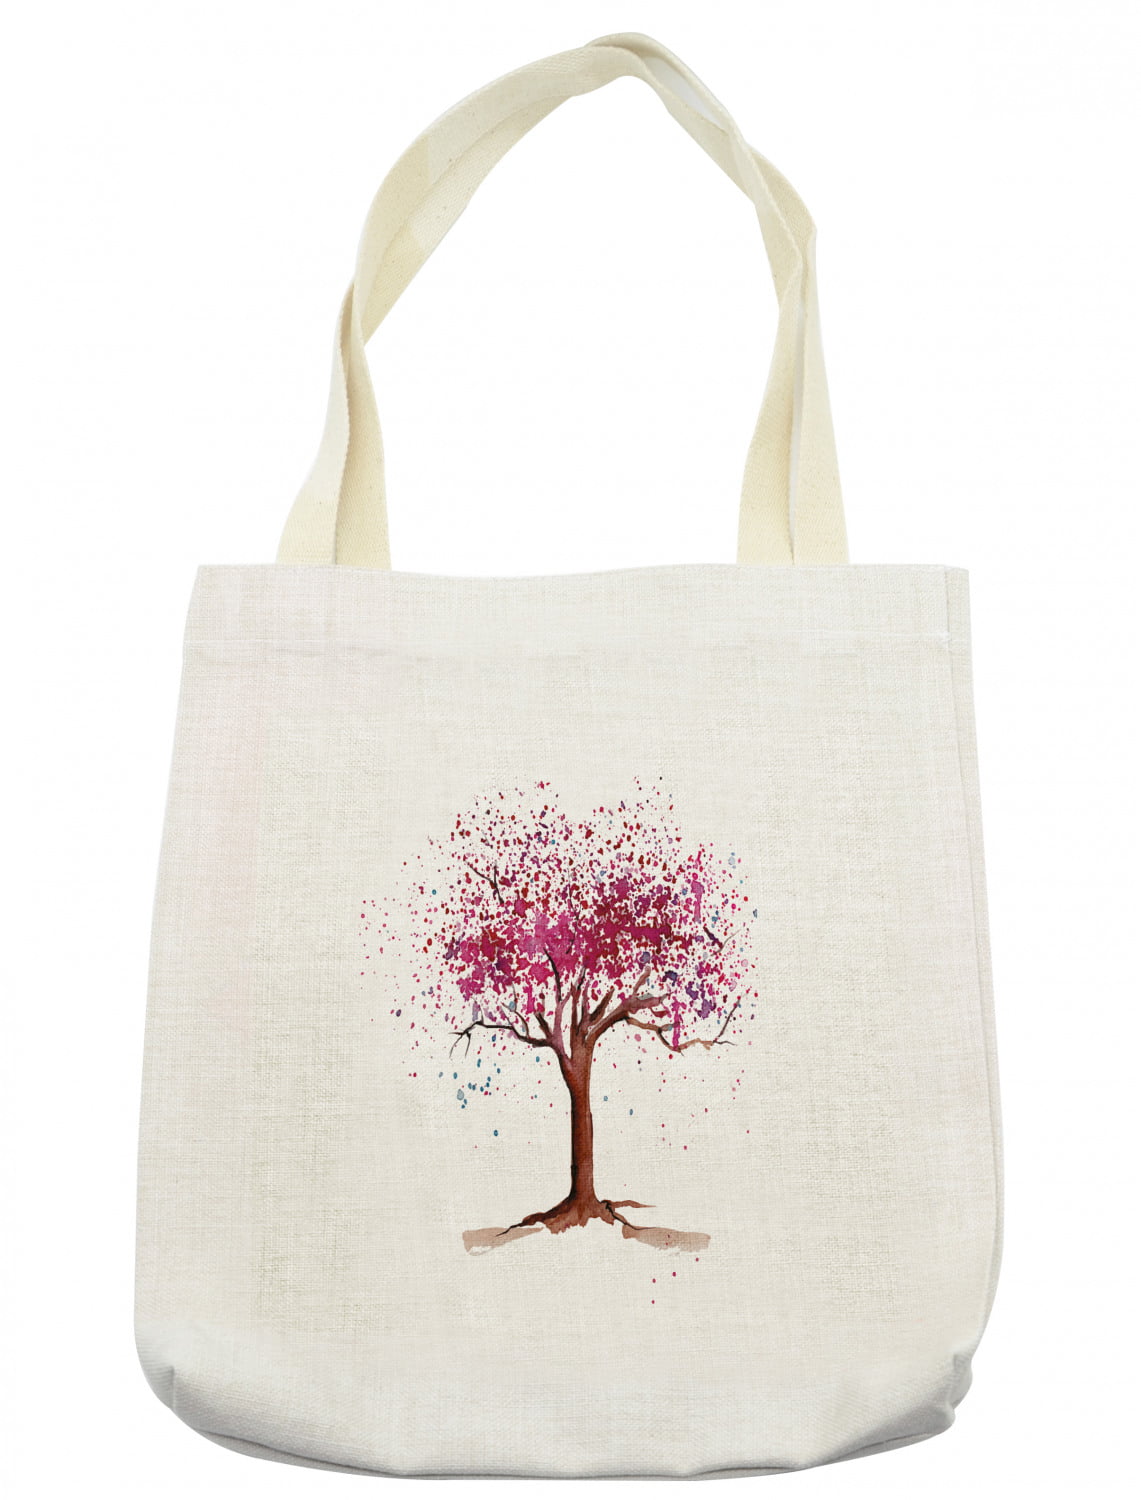 Floral Tote Bag, Japanese Cherry Blossom Buds Sakura Tree in Watercolor ...